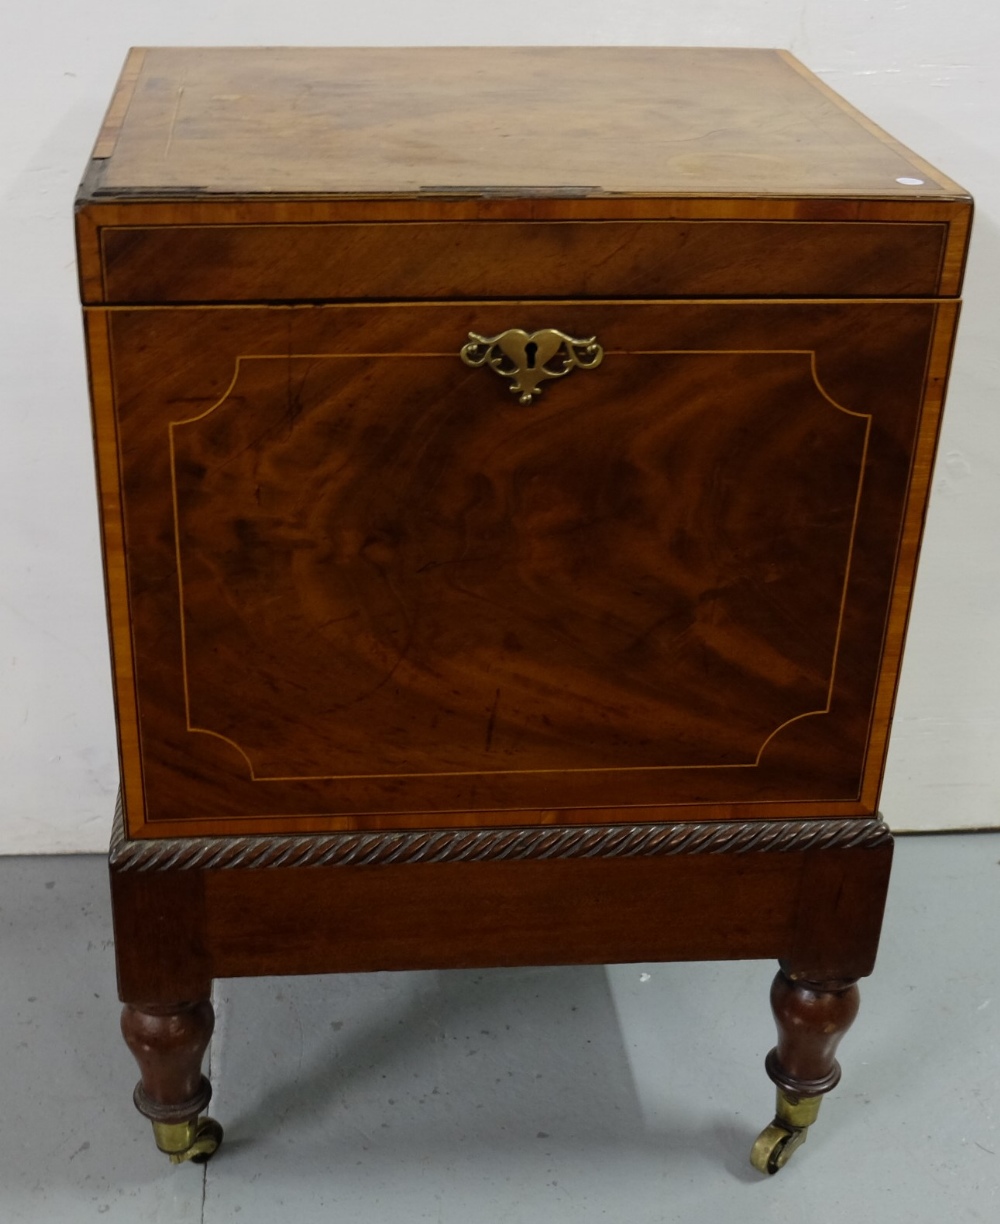 Georgian Mahogany wine cooler, square shaped and inlaid top, opening fitted compartment, brass